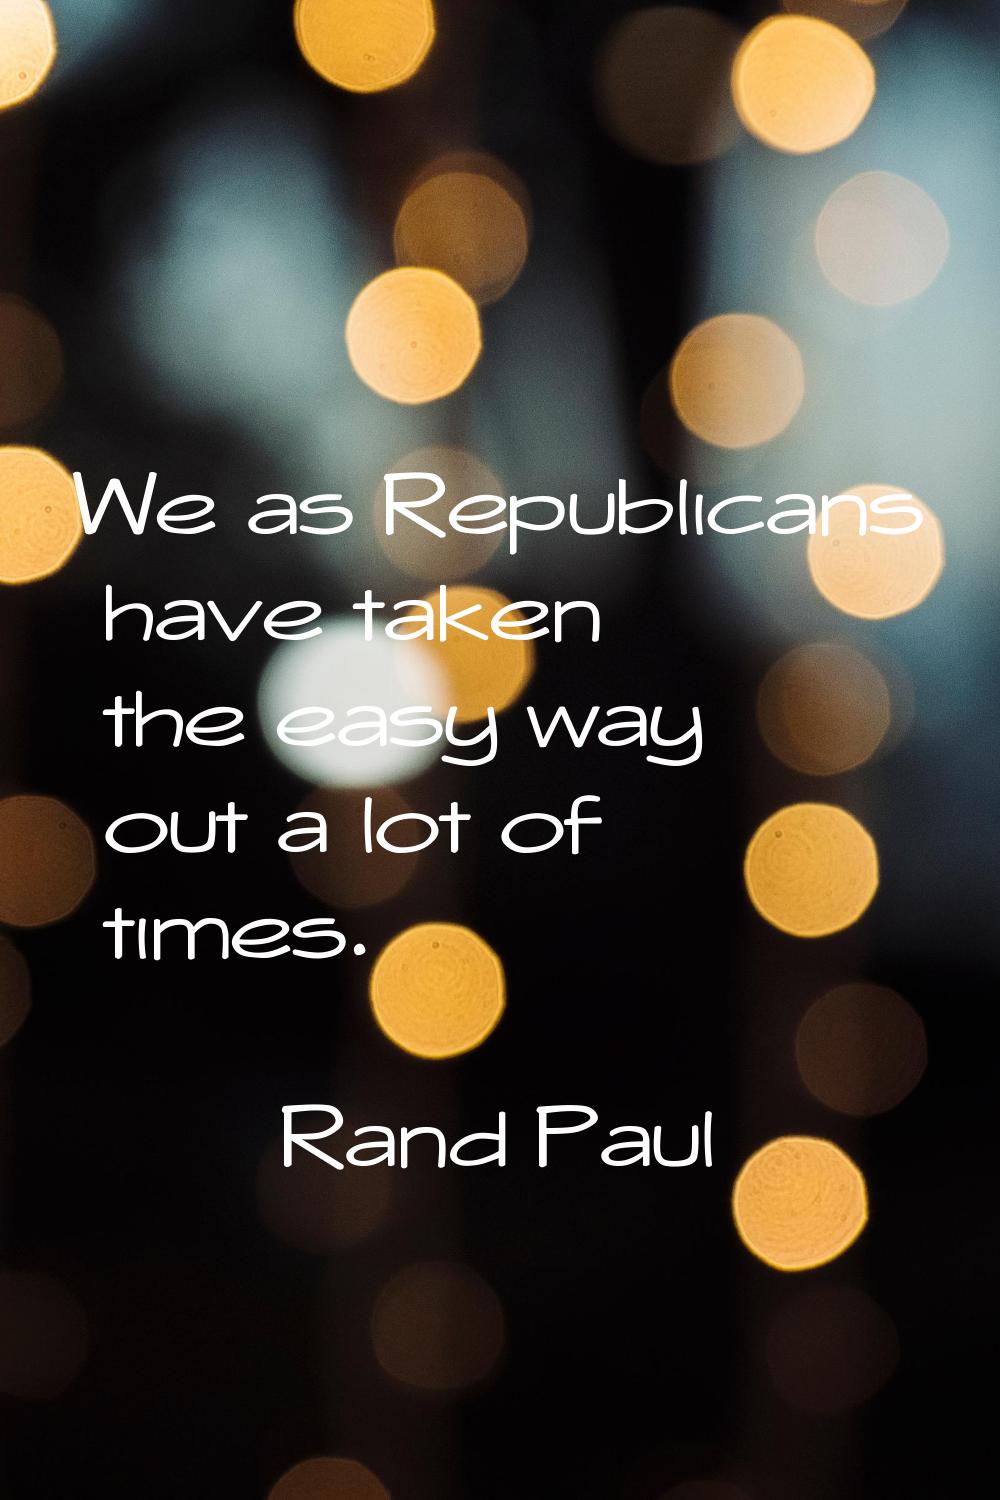 We as Republicans have taken the easy way out a lot of times.